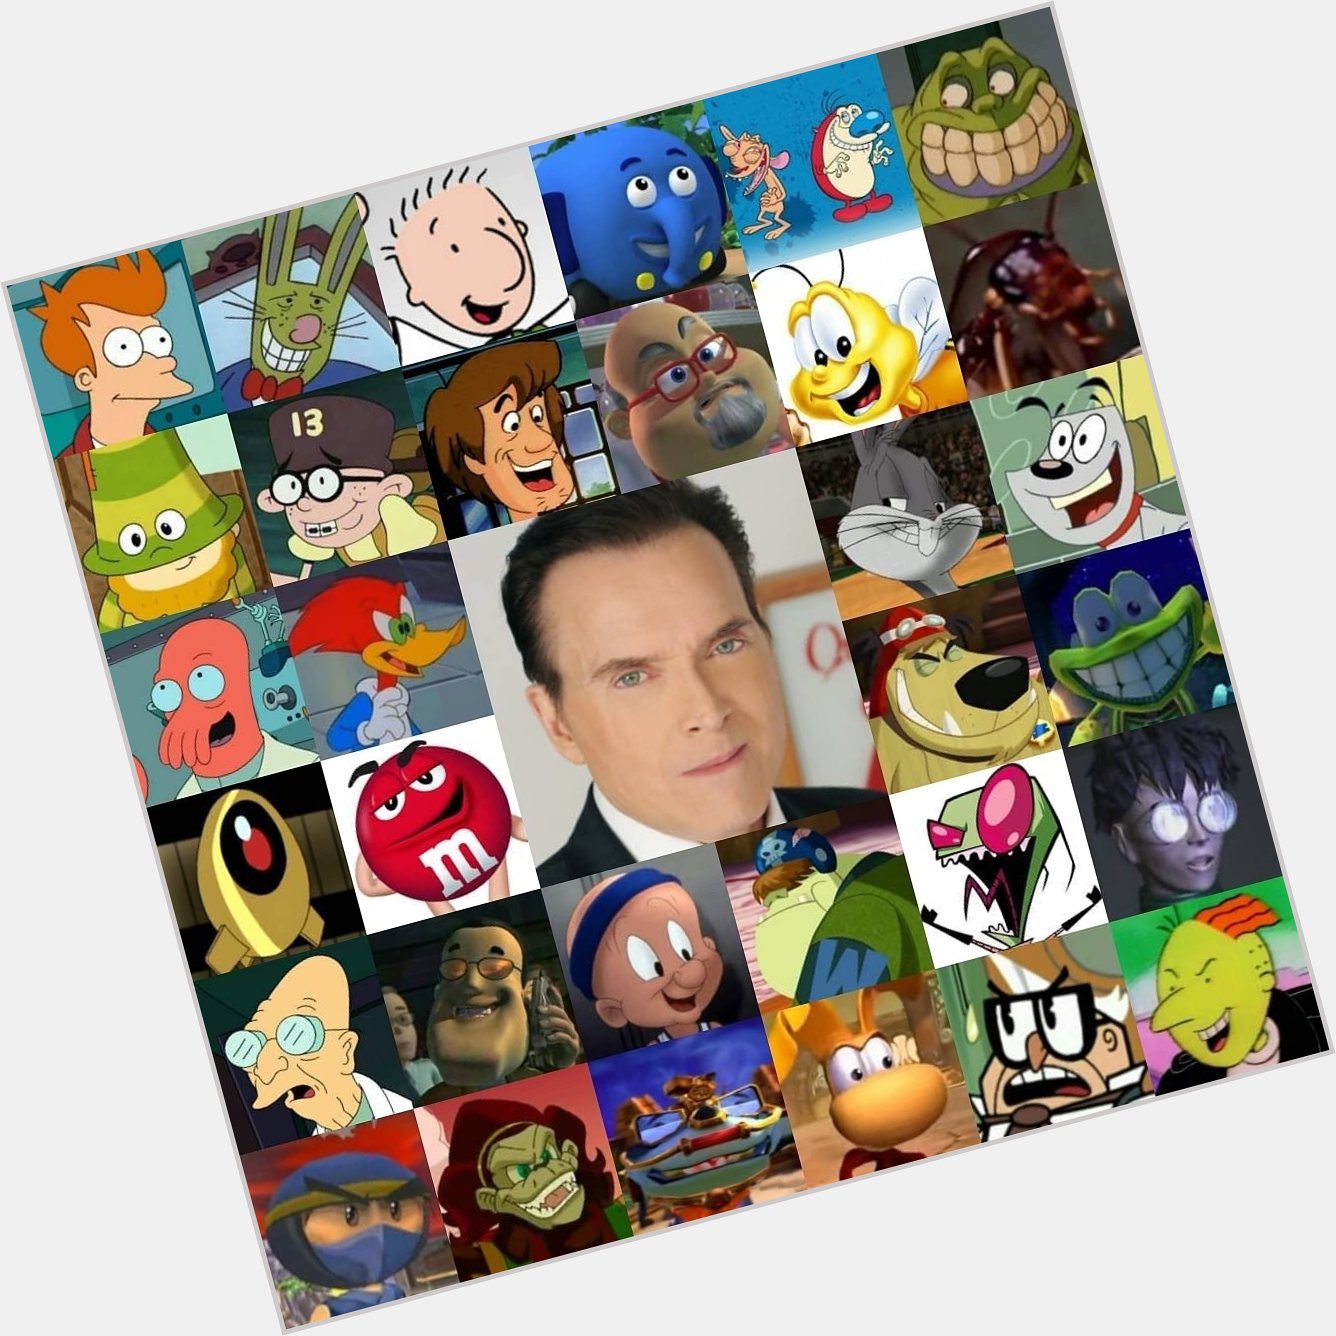 Happy 68th Birthday to voice actor, musician, singer, and songwriter, Billy West! 